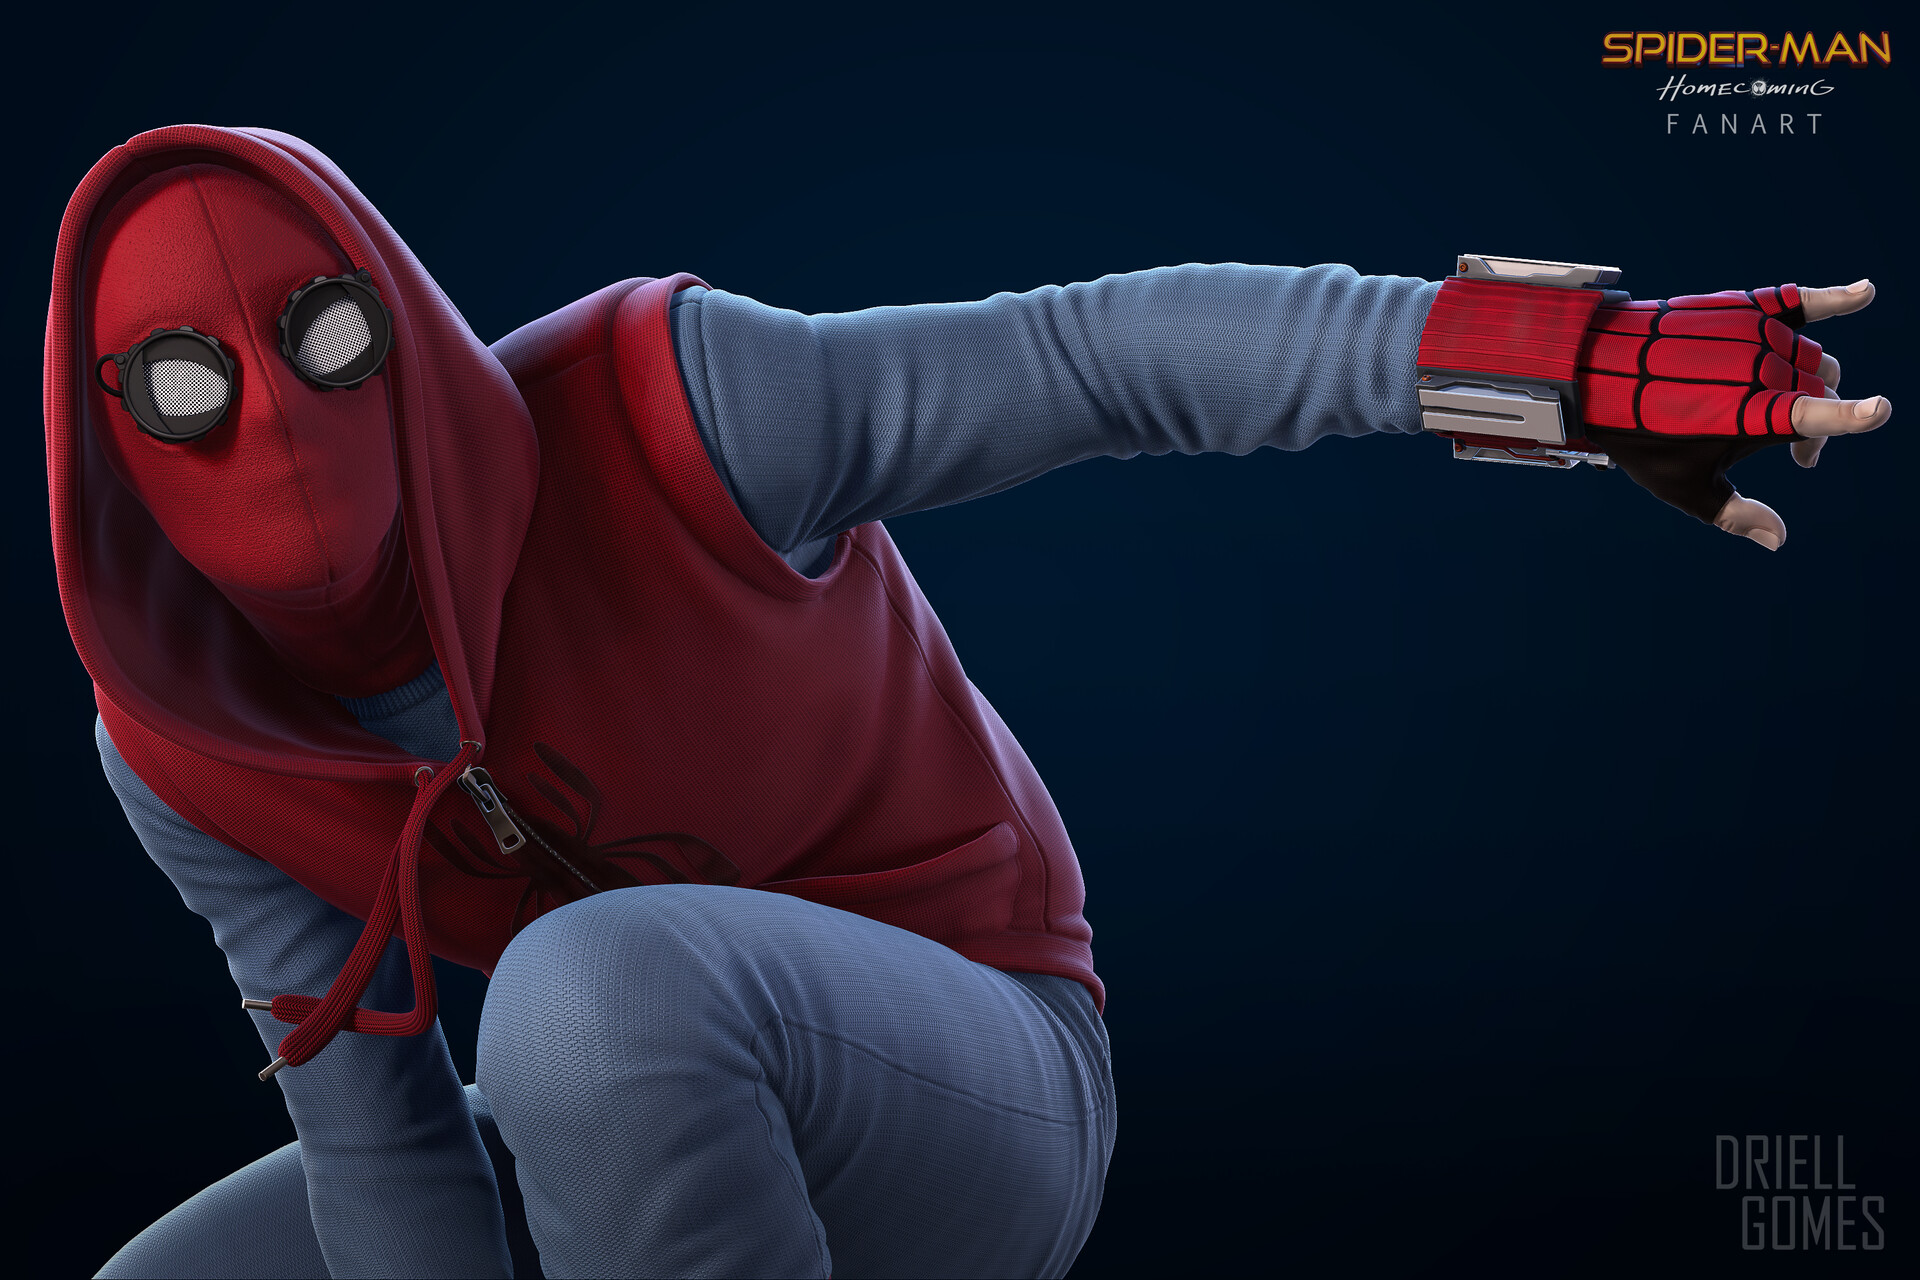 Spider-Man Homemade Suit Fan Art, Driell Gomes.